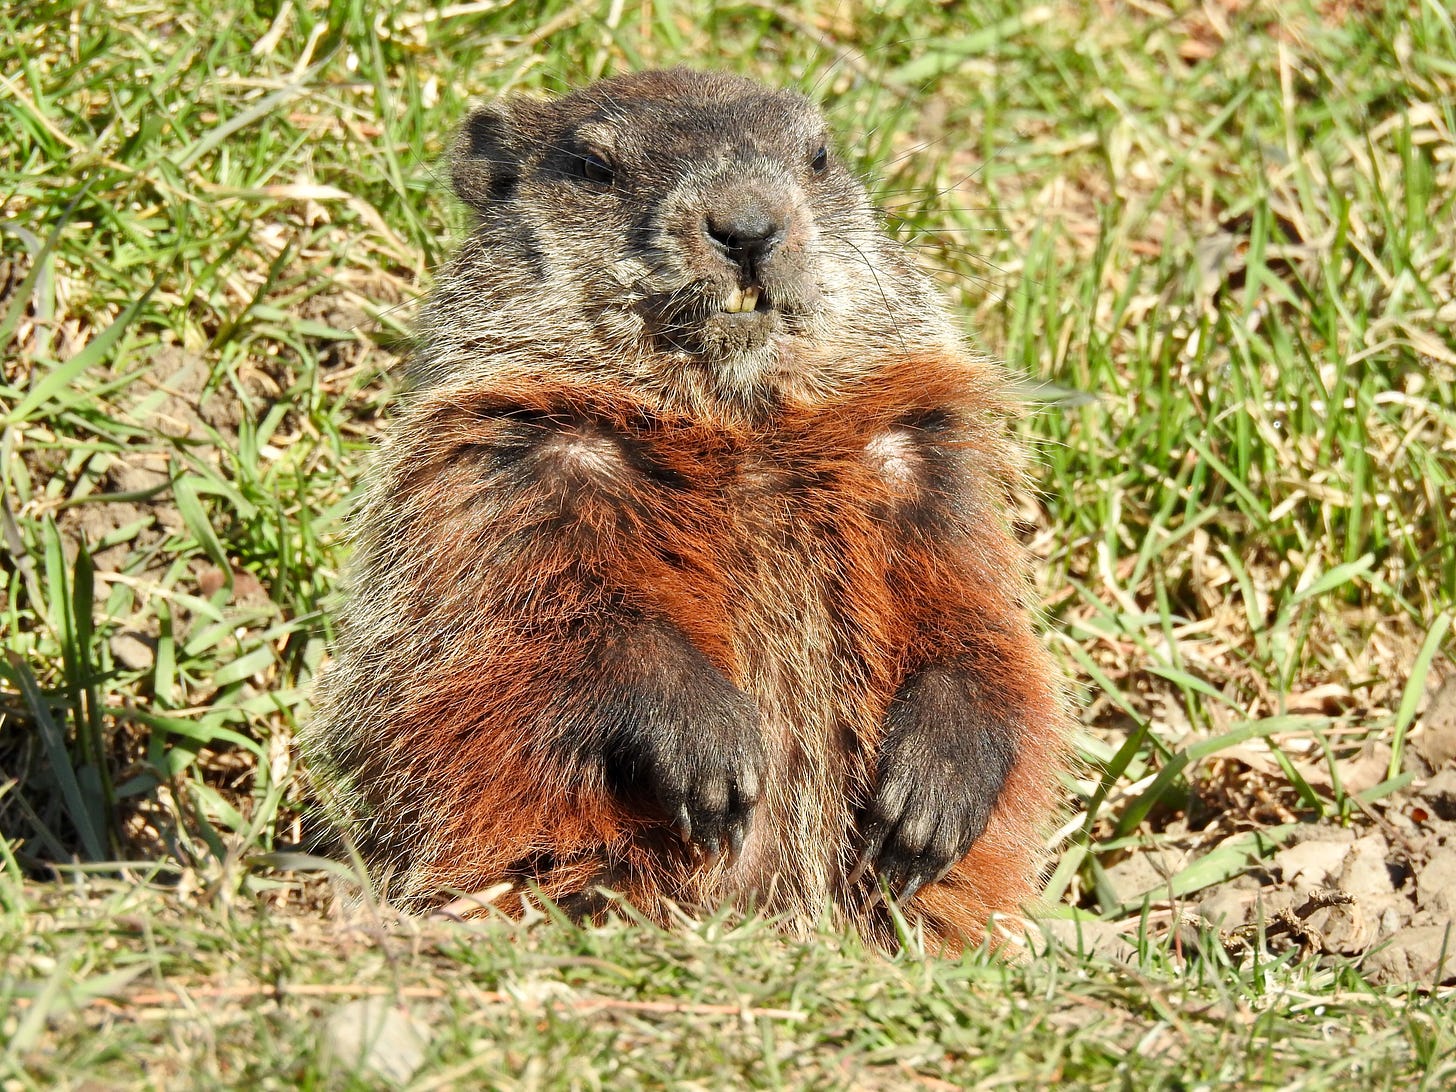 A chonky beaver with red fur on its chest sitting on its haunches on the grass soaking up the sun